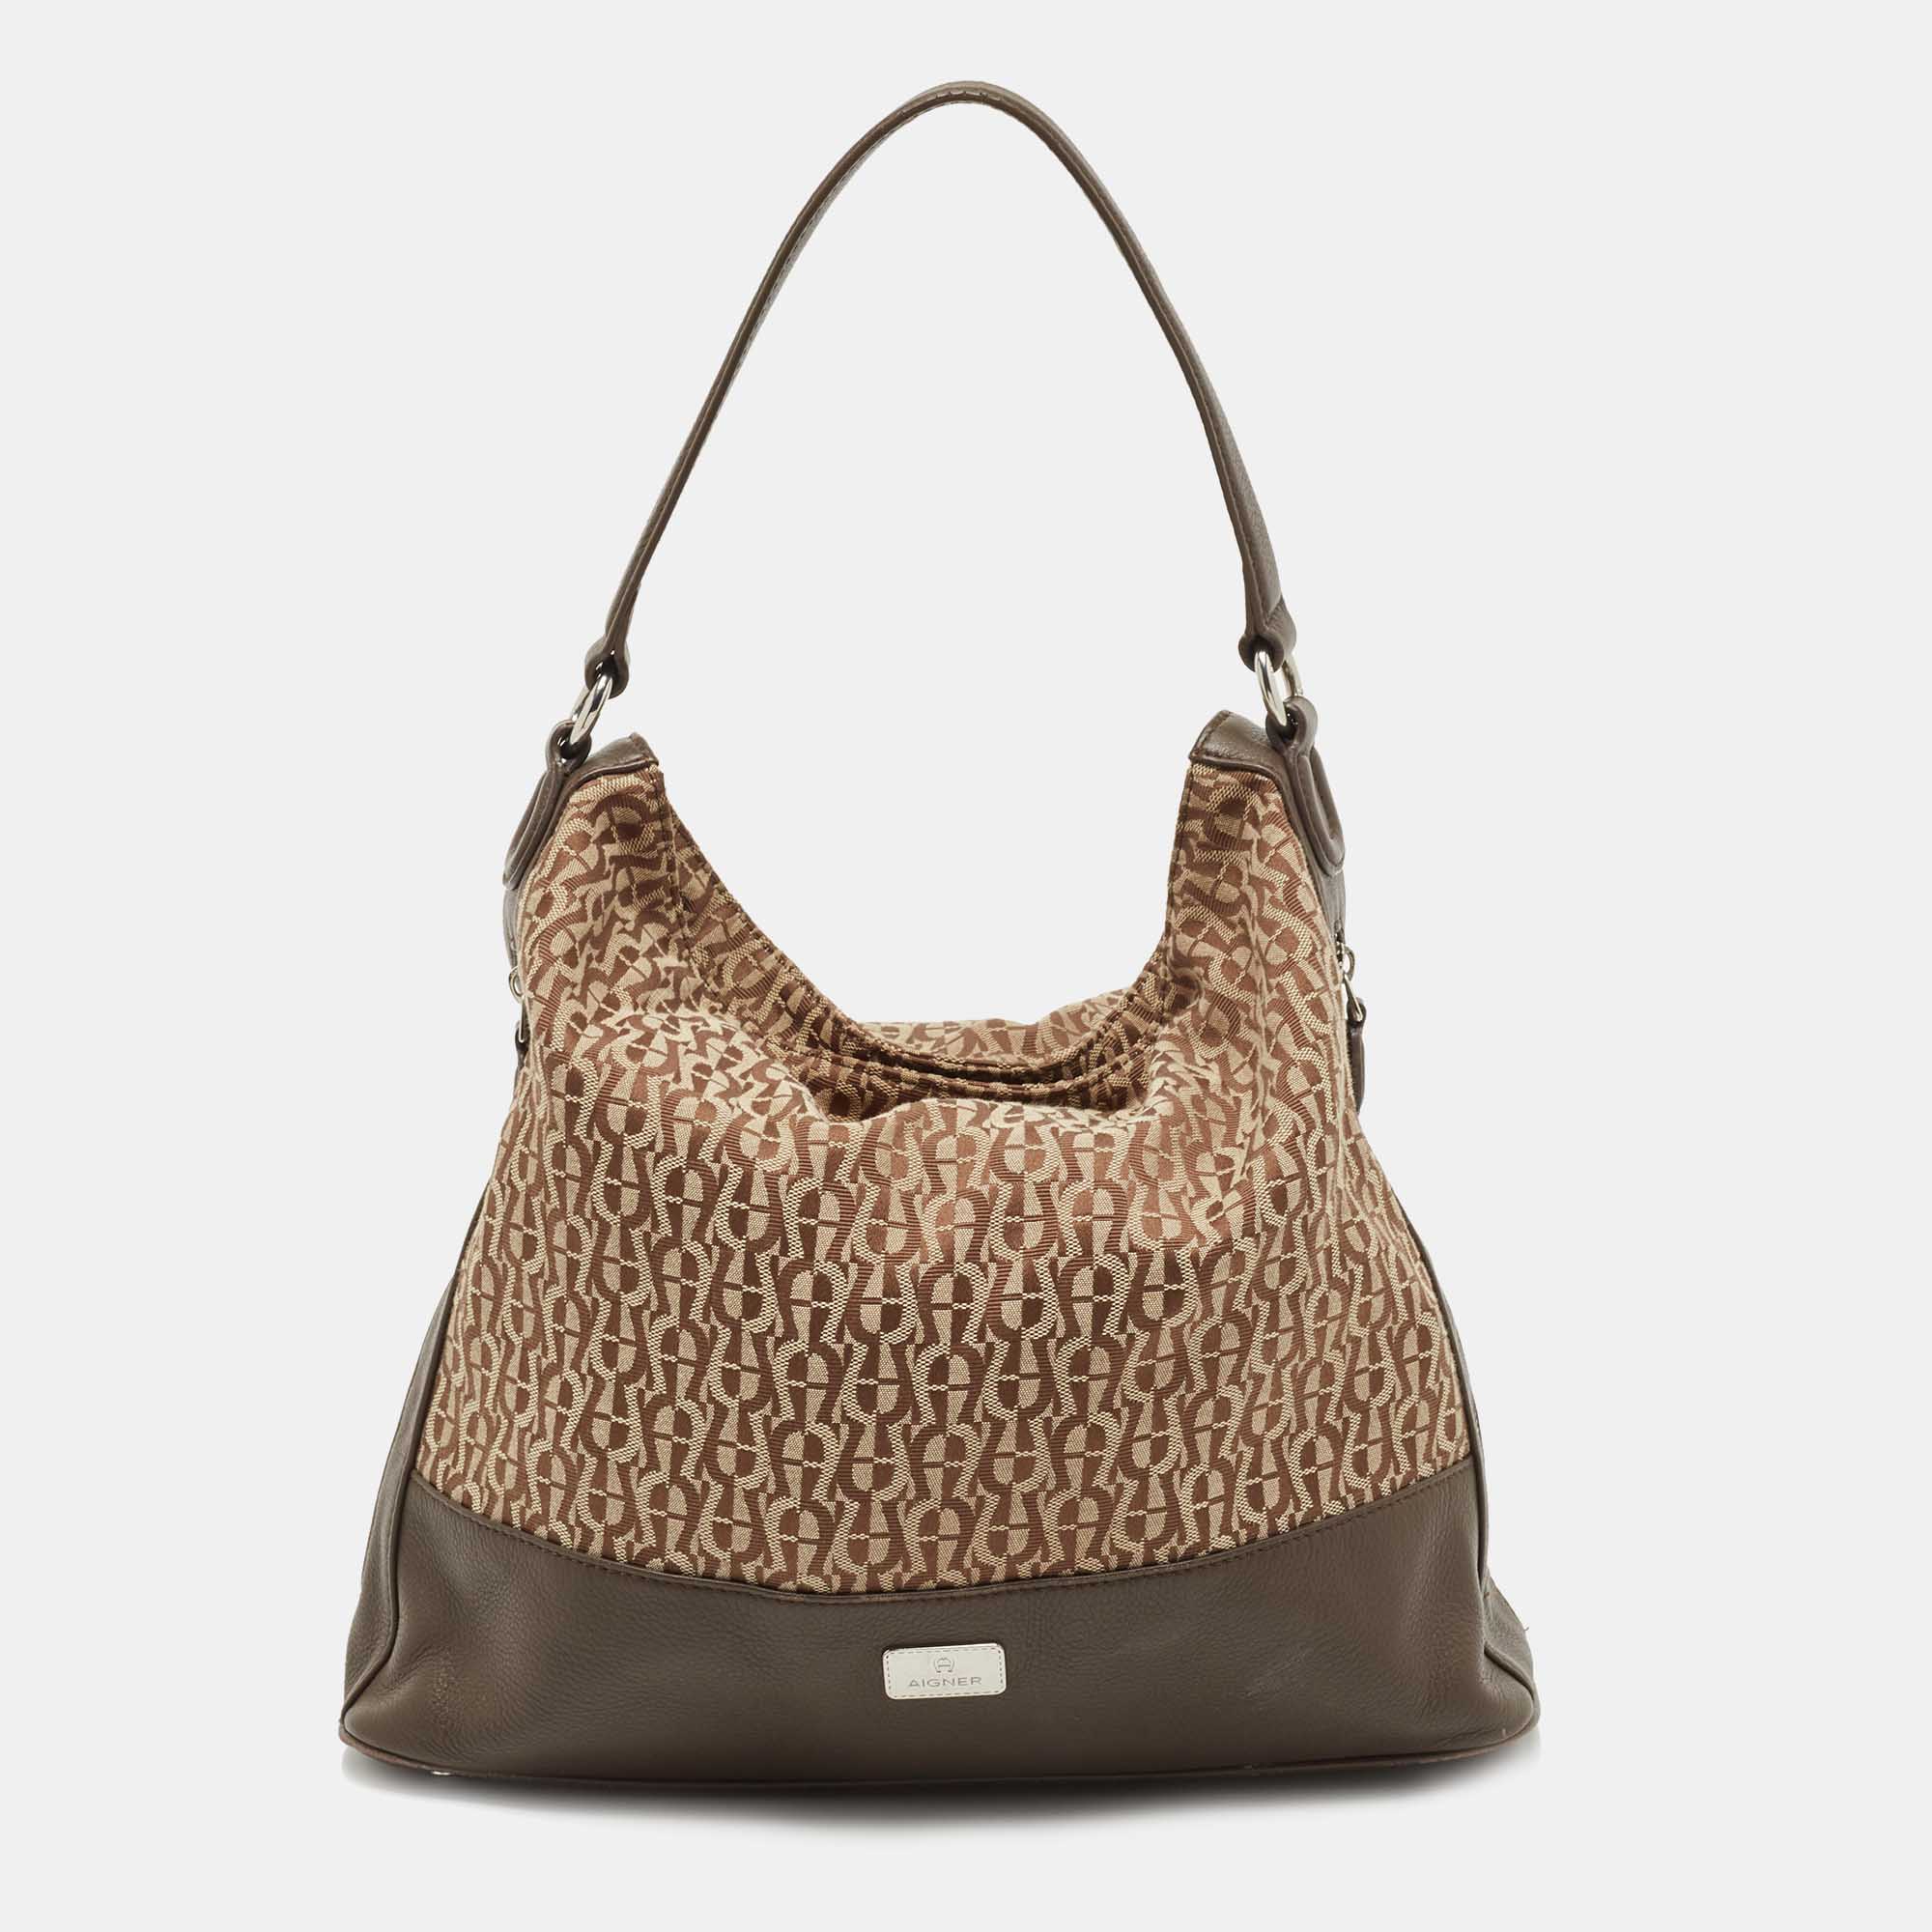 Elevate your day to day look by carrying this sleek Aigner hobo from work to weekend. This bag features a quality fabric lined interior. This bag is made of monogram canvas and leather. Elegance meets style effortlessly when you team up your outfit with this hobo.